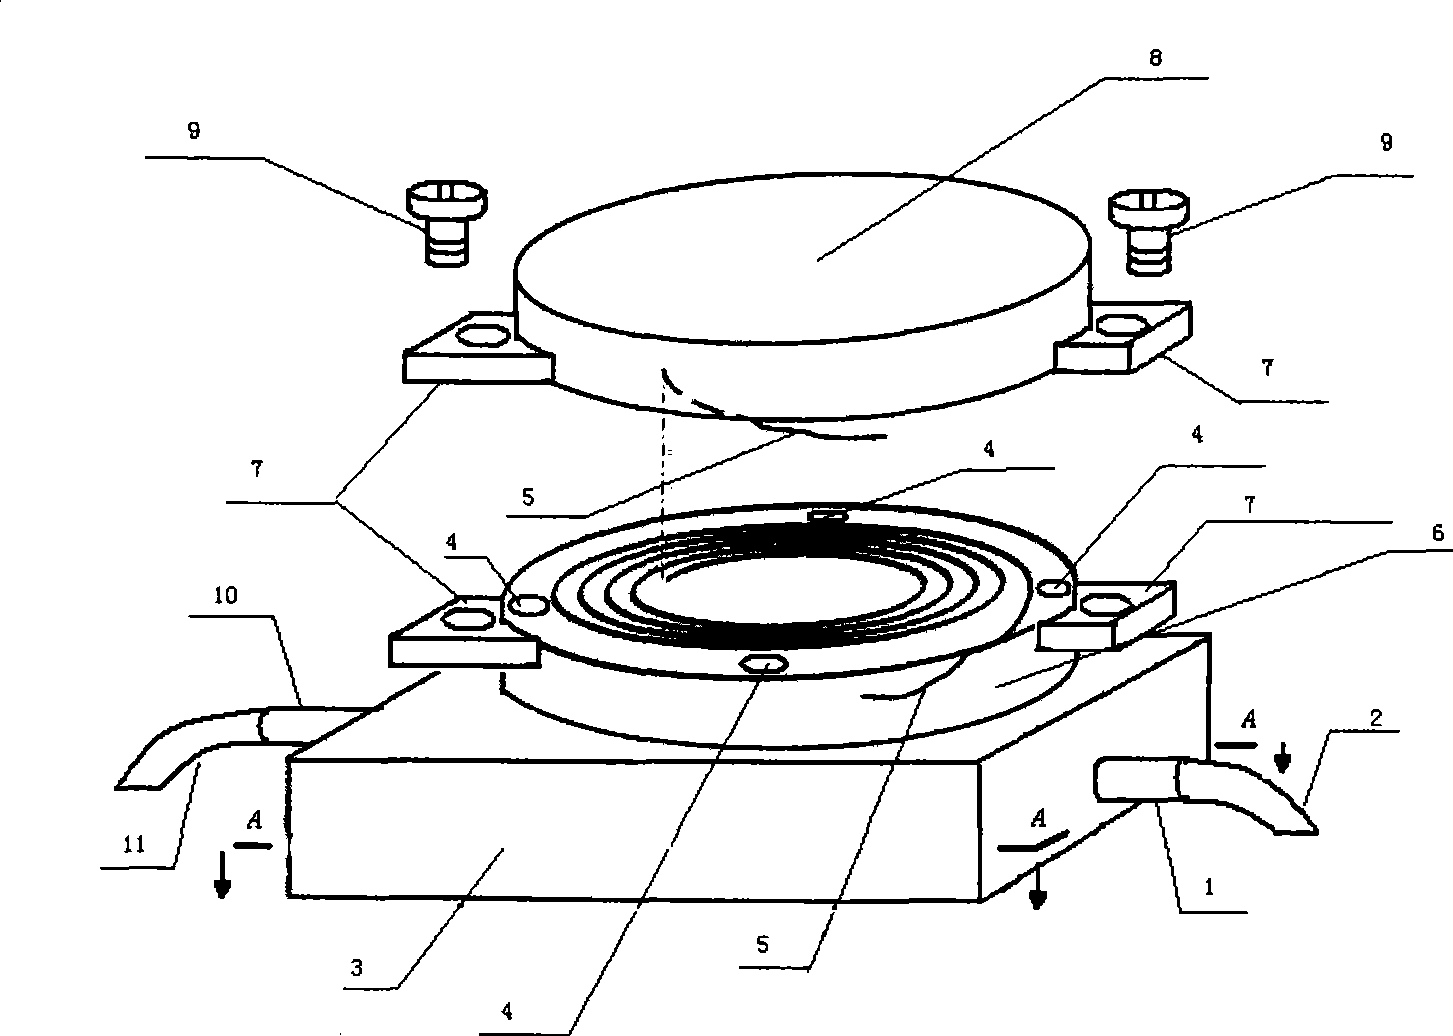 Circulation device refrigerated by optical fiber integrally